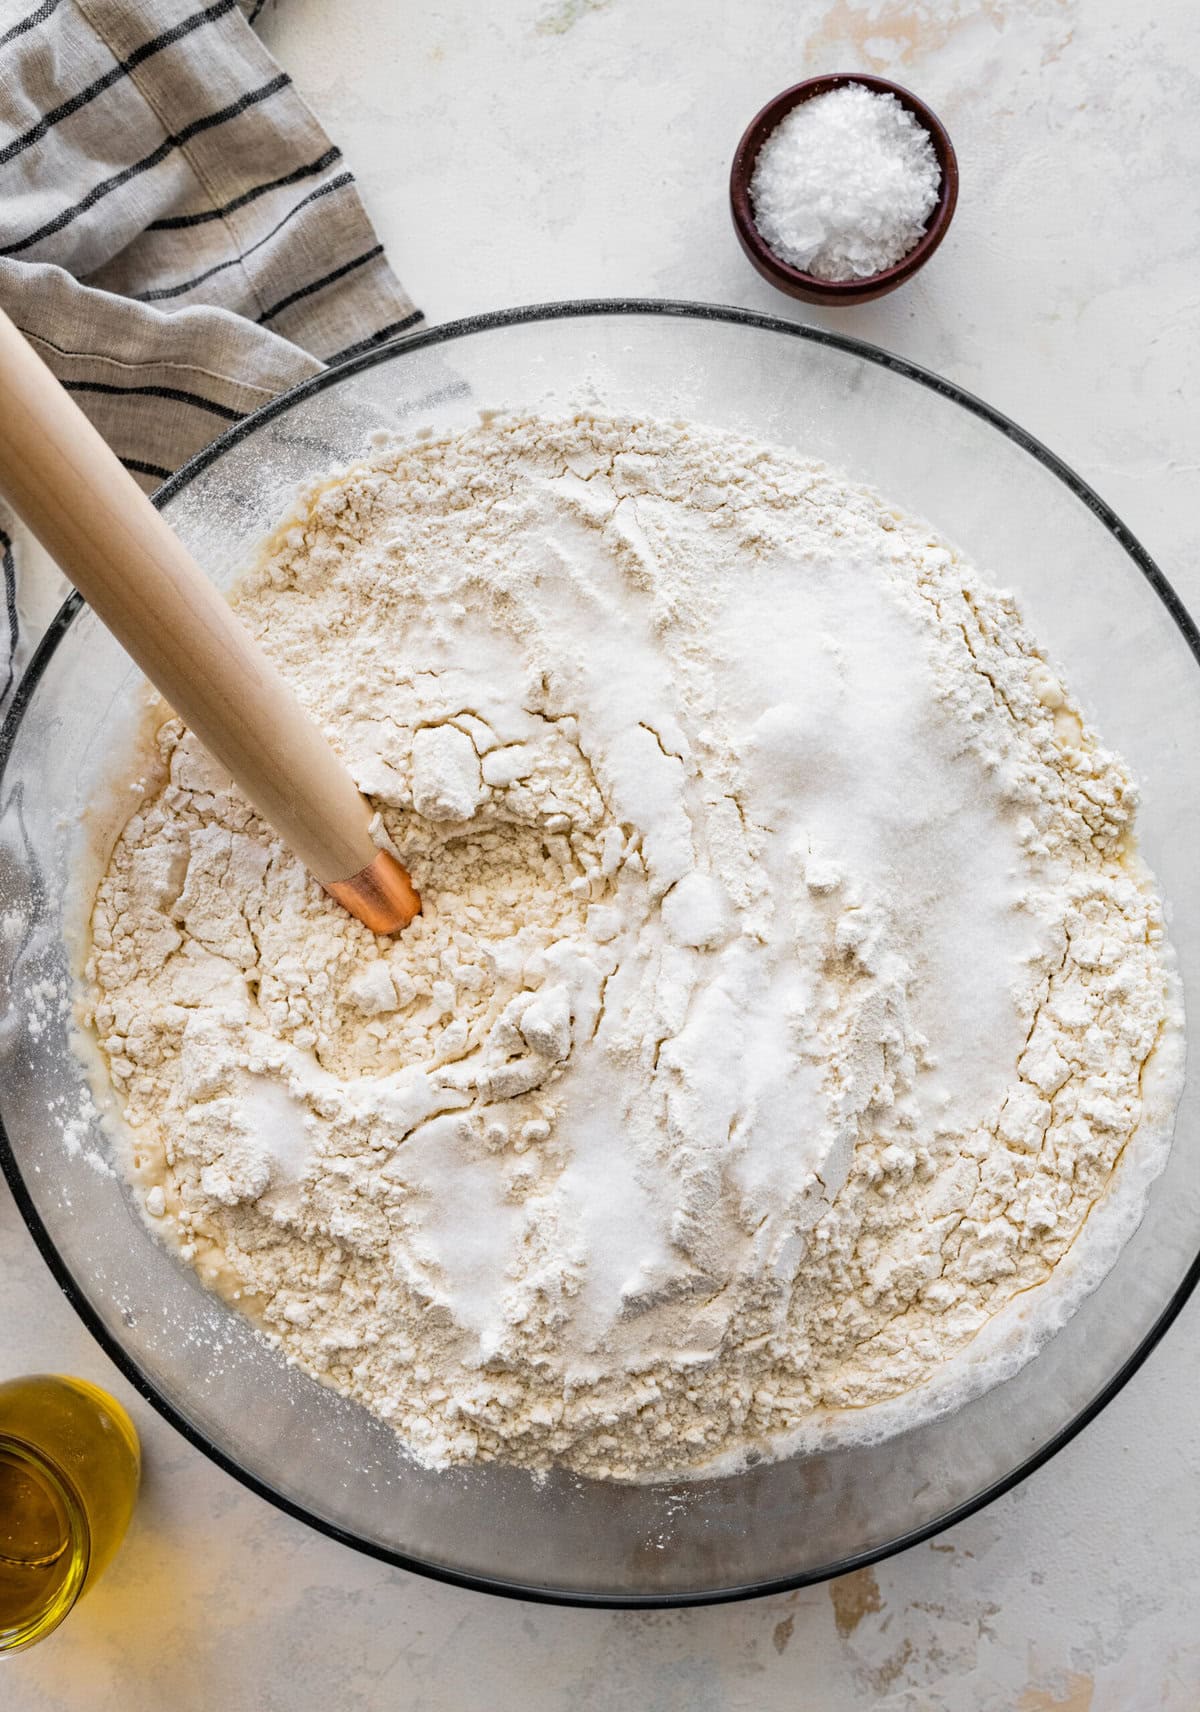 how to make no-knead focaccia bread step-by-step: add flour to the yeast and water mixture.